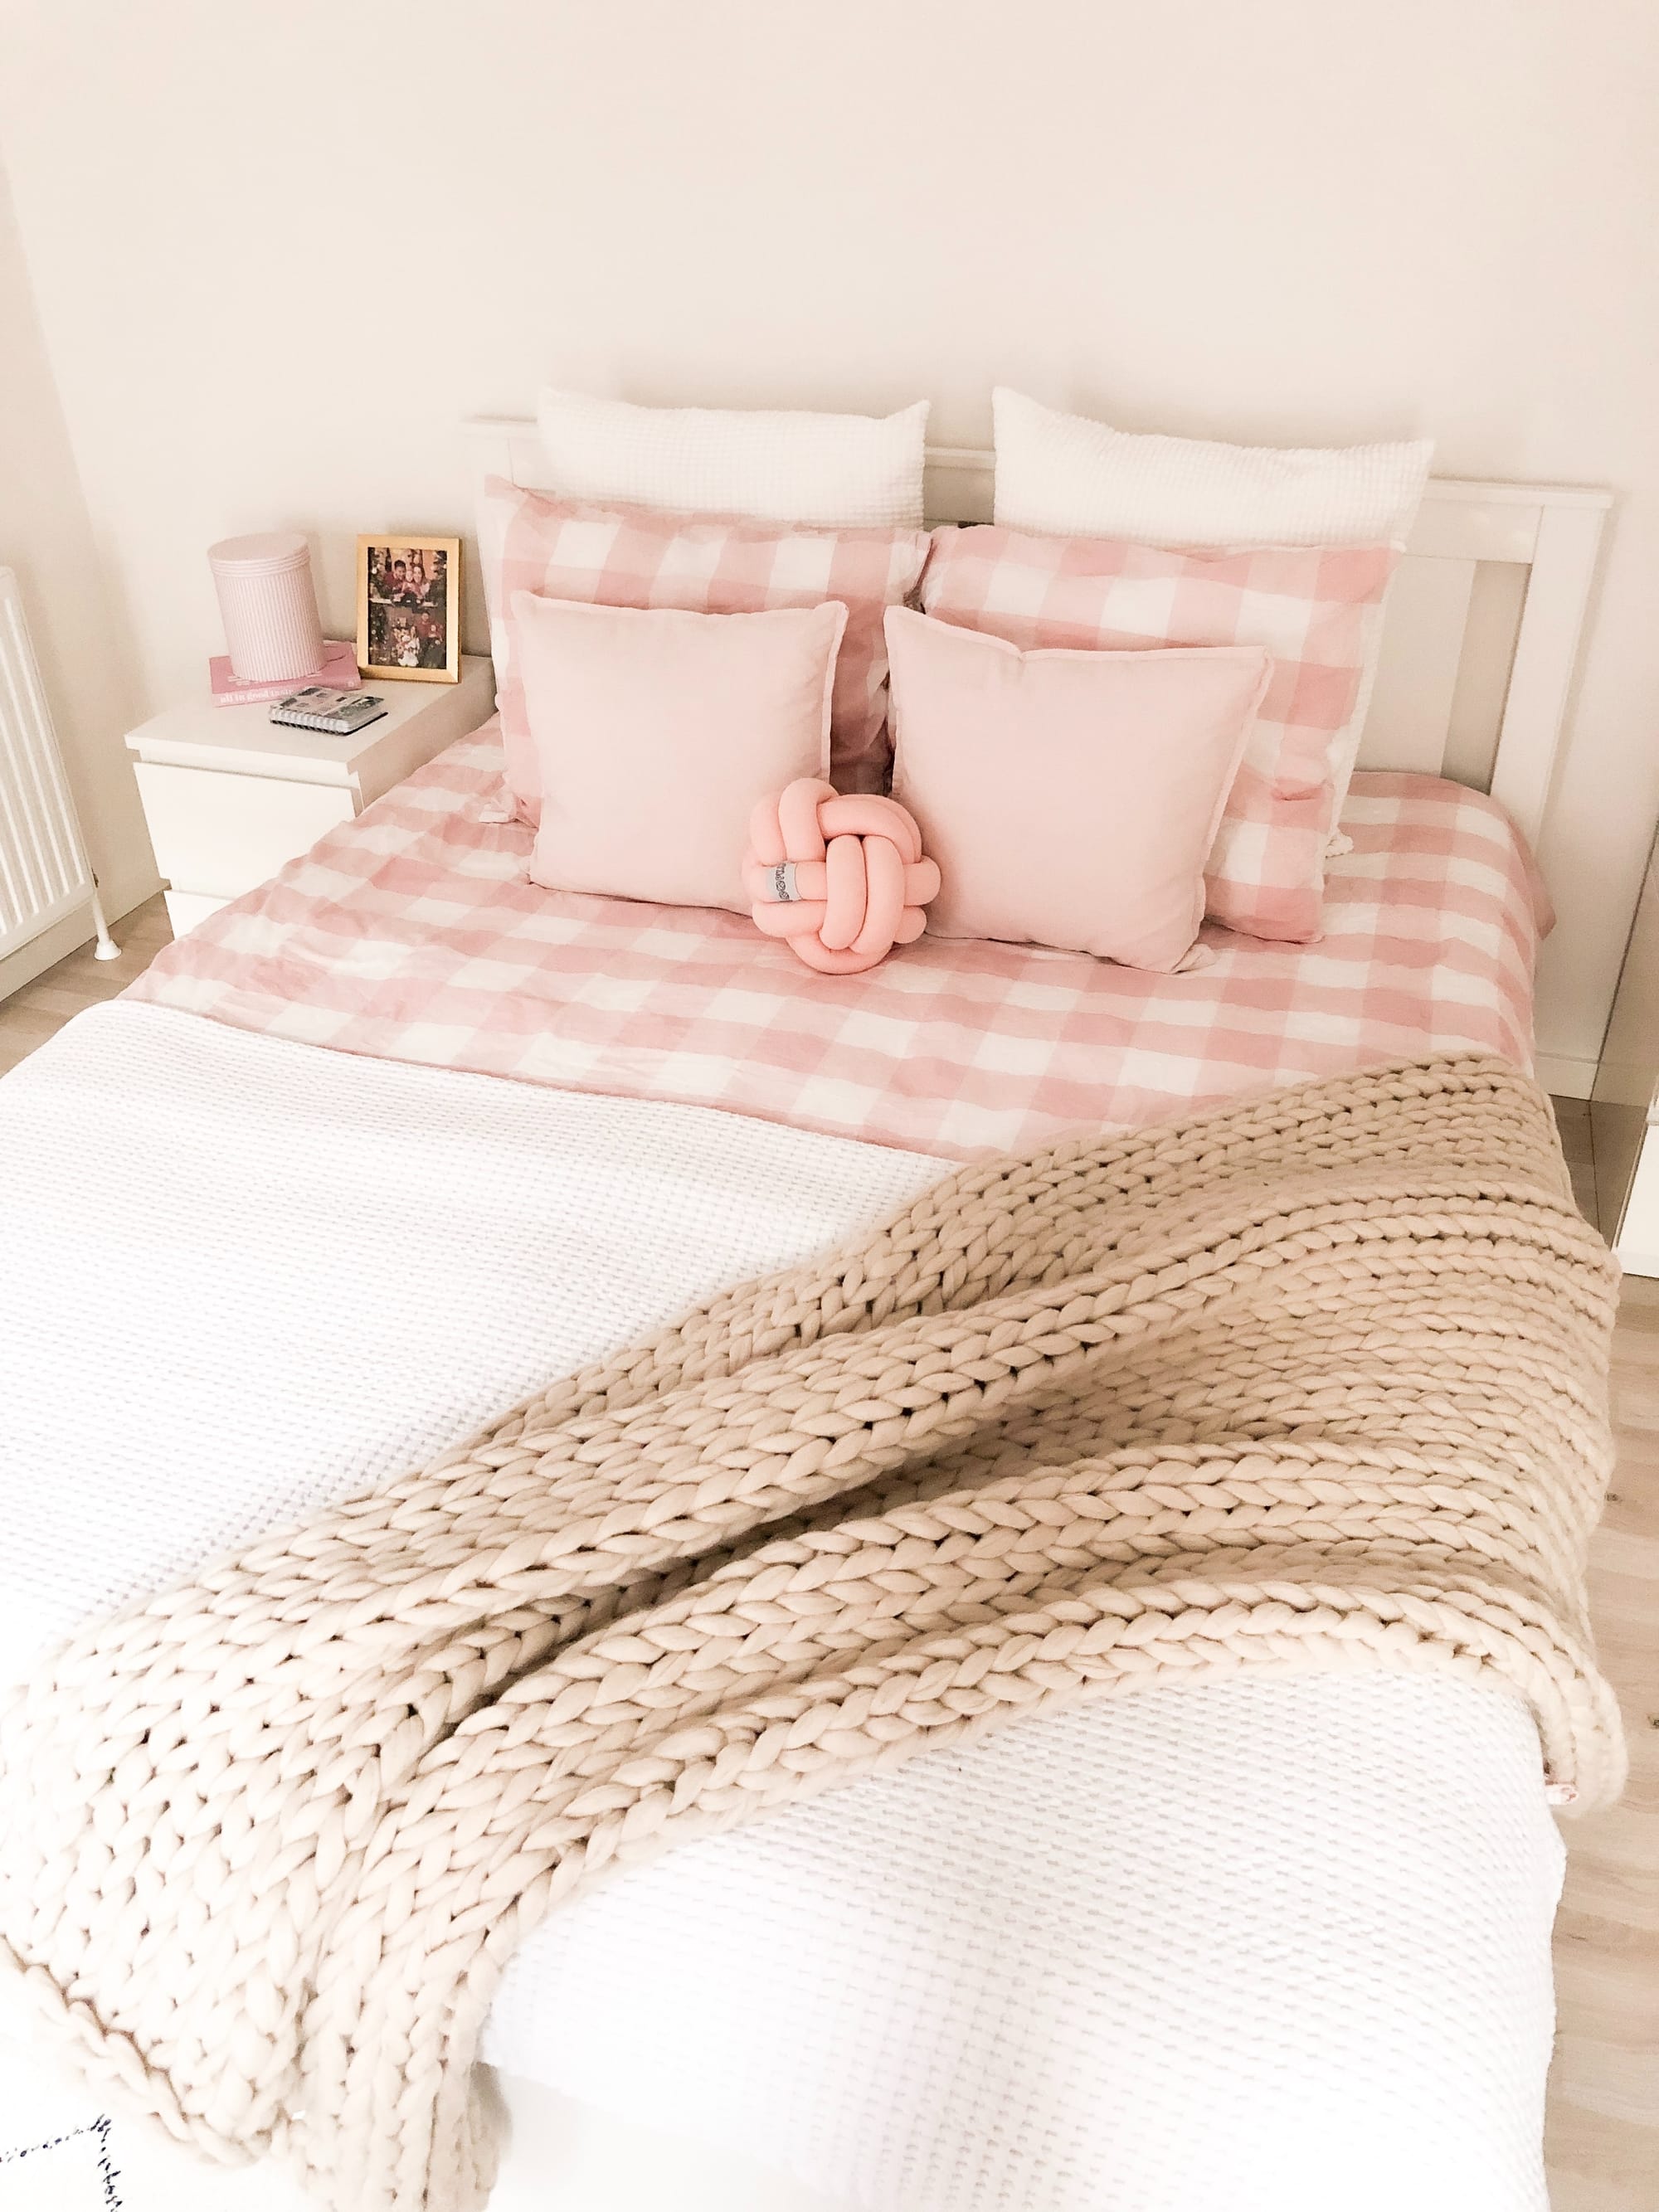 A pink and white bedroom